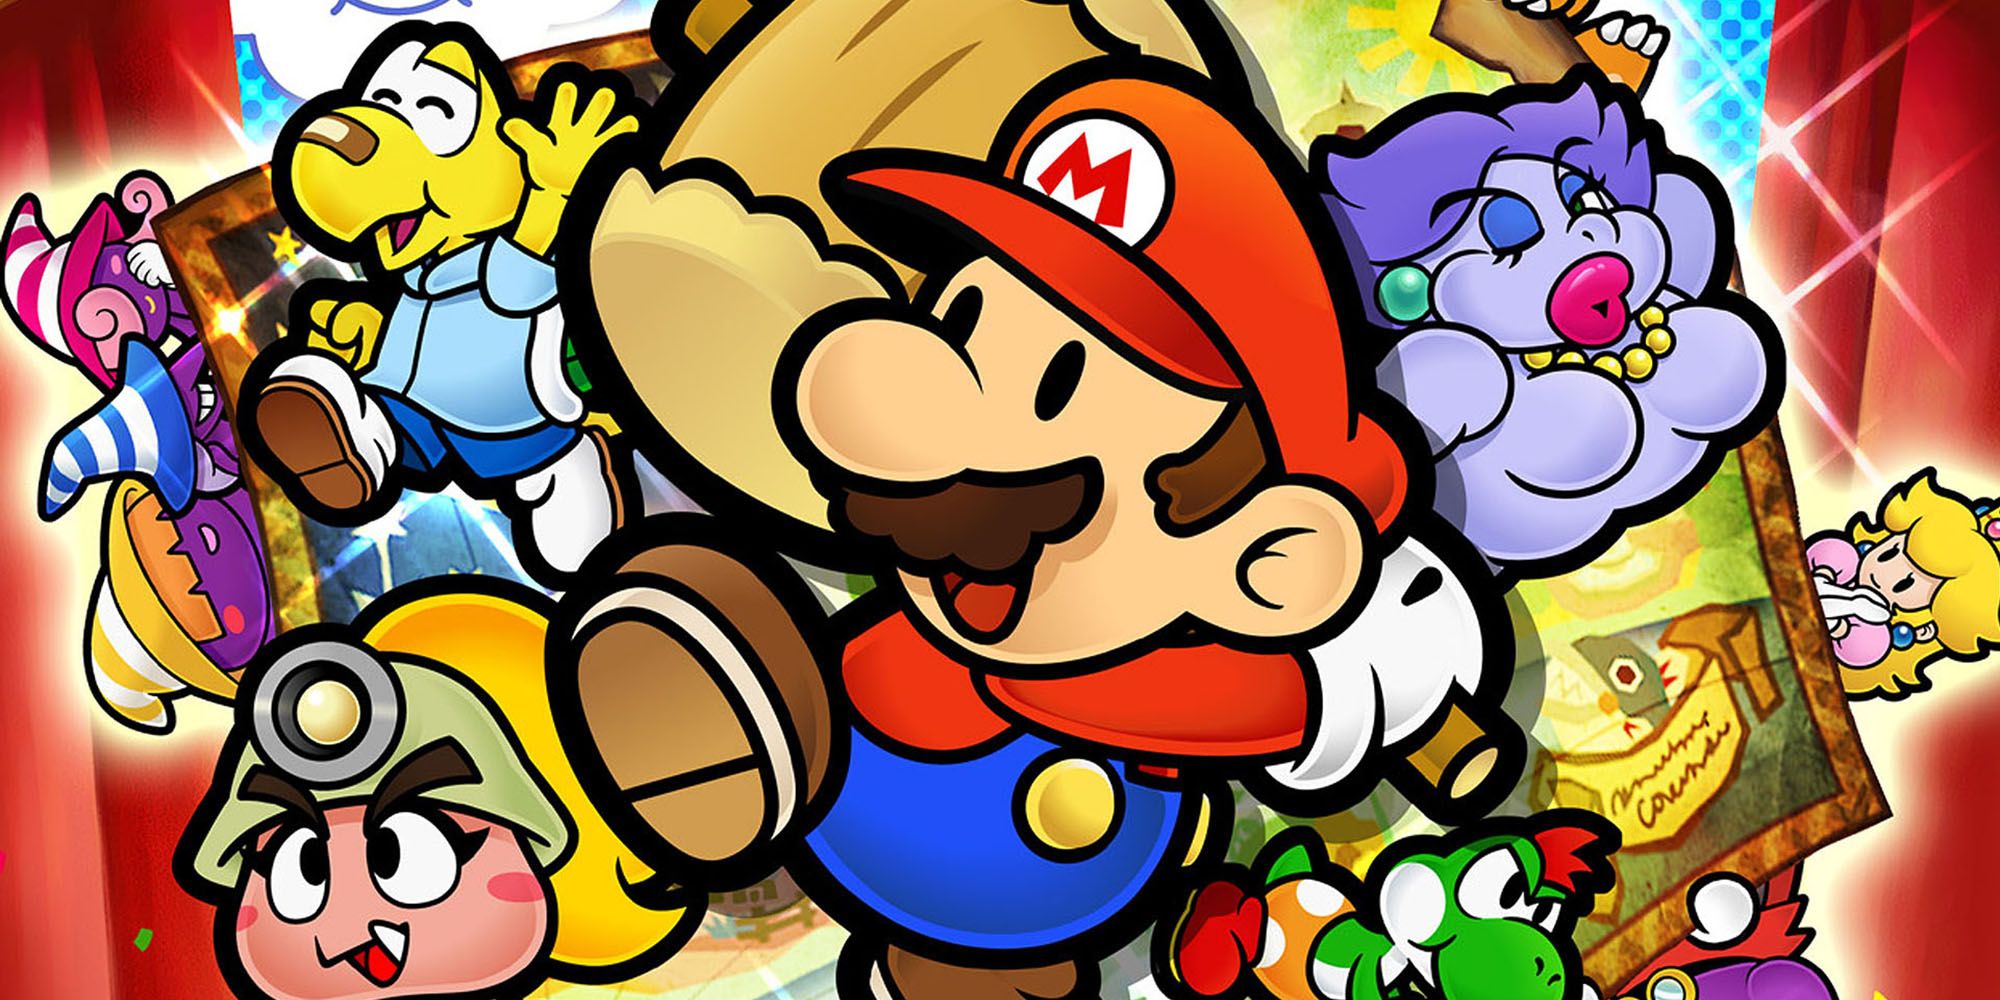 Paper Mario the Thousand Year Door Promo Art with side characters.